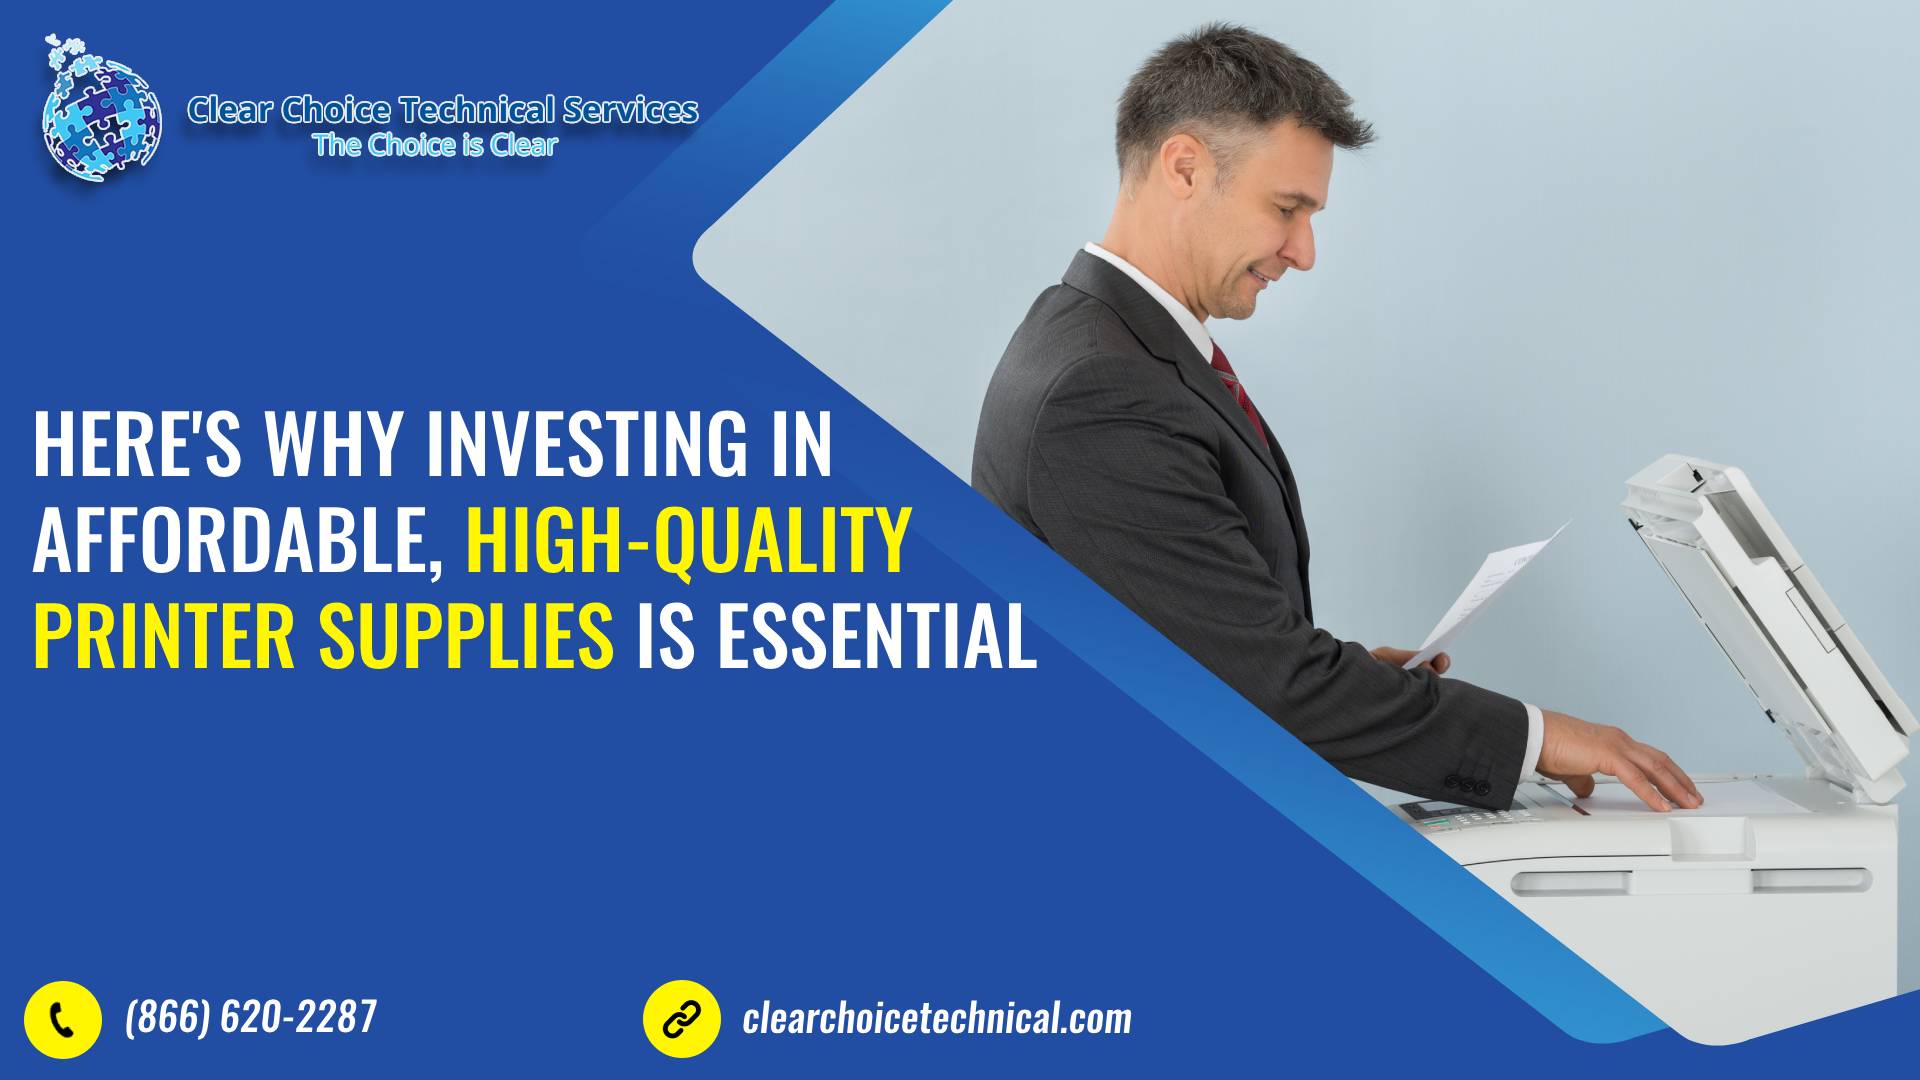 heres-why-investing-in-affordable-high-quality-printer-supplies-is-essential